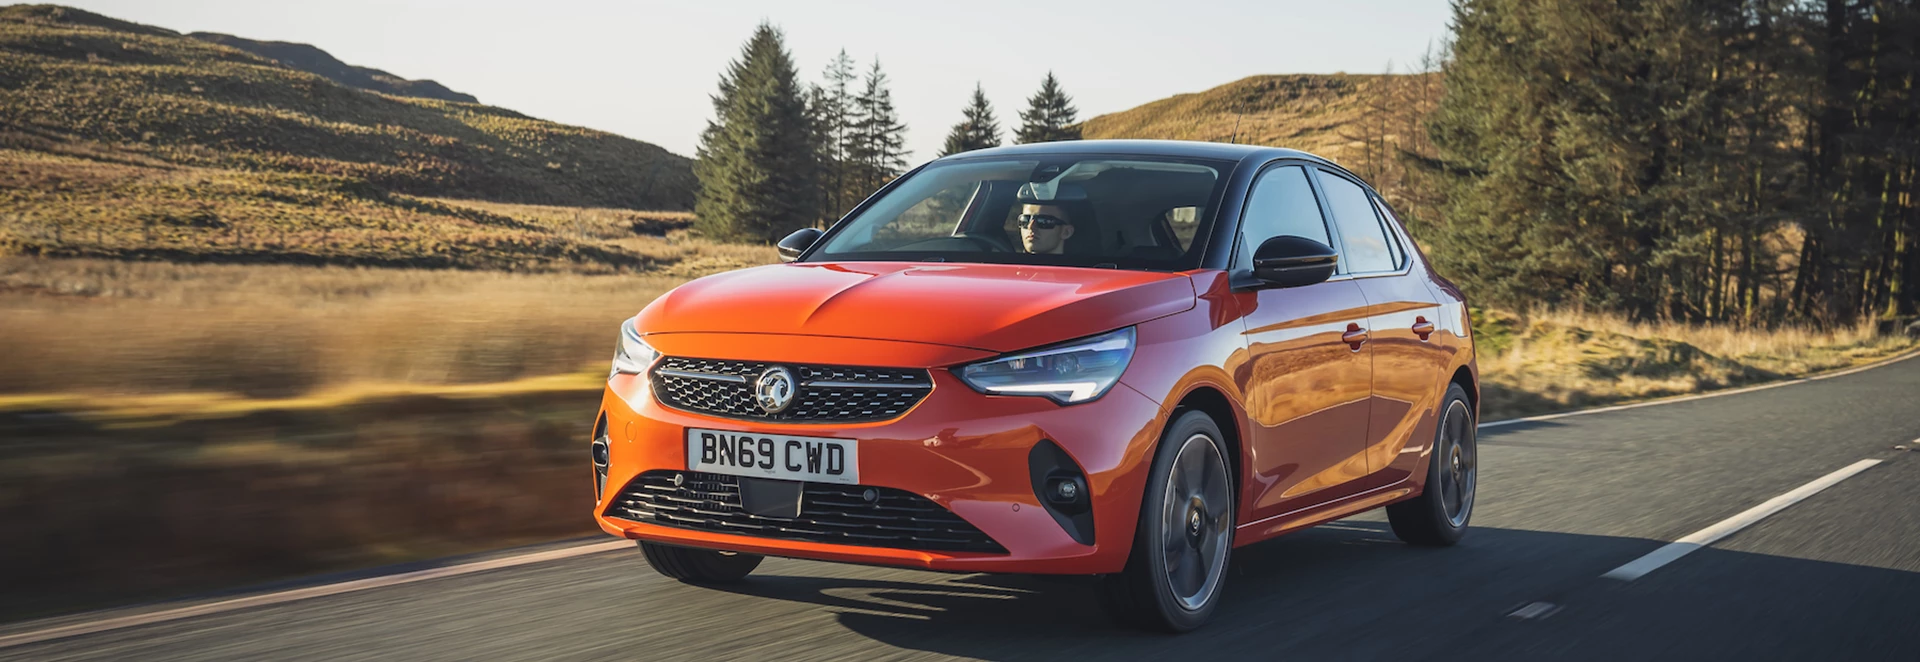 These were the UK’s best-selling new cars in March 